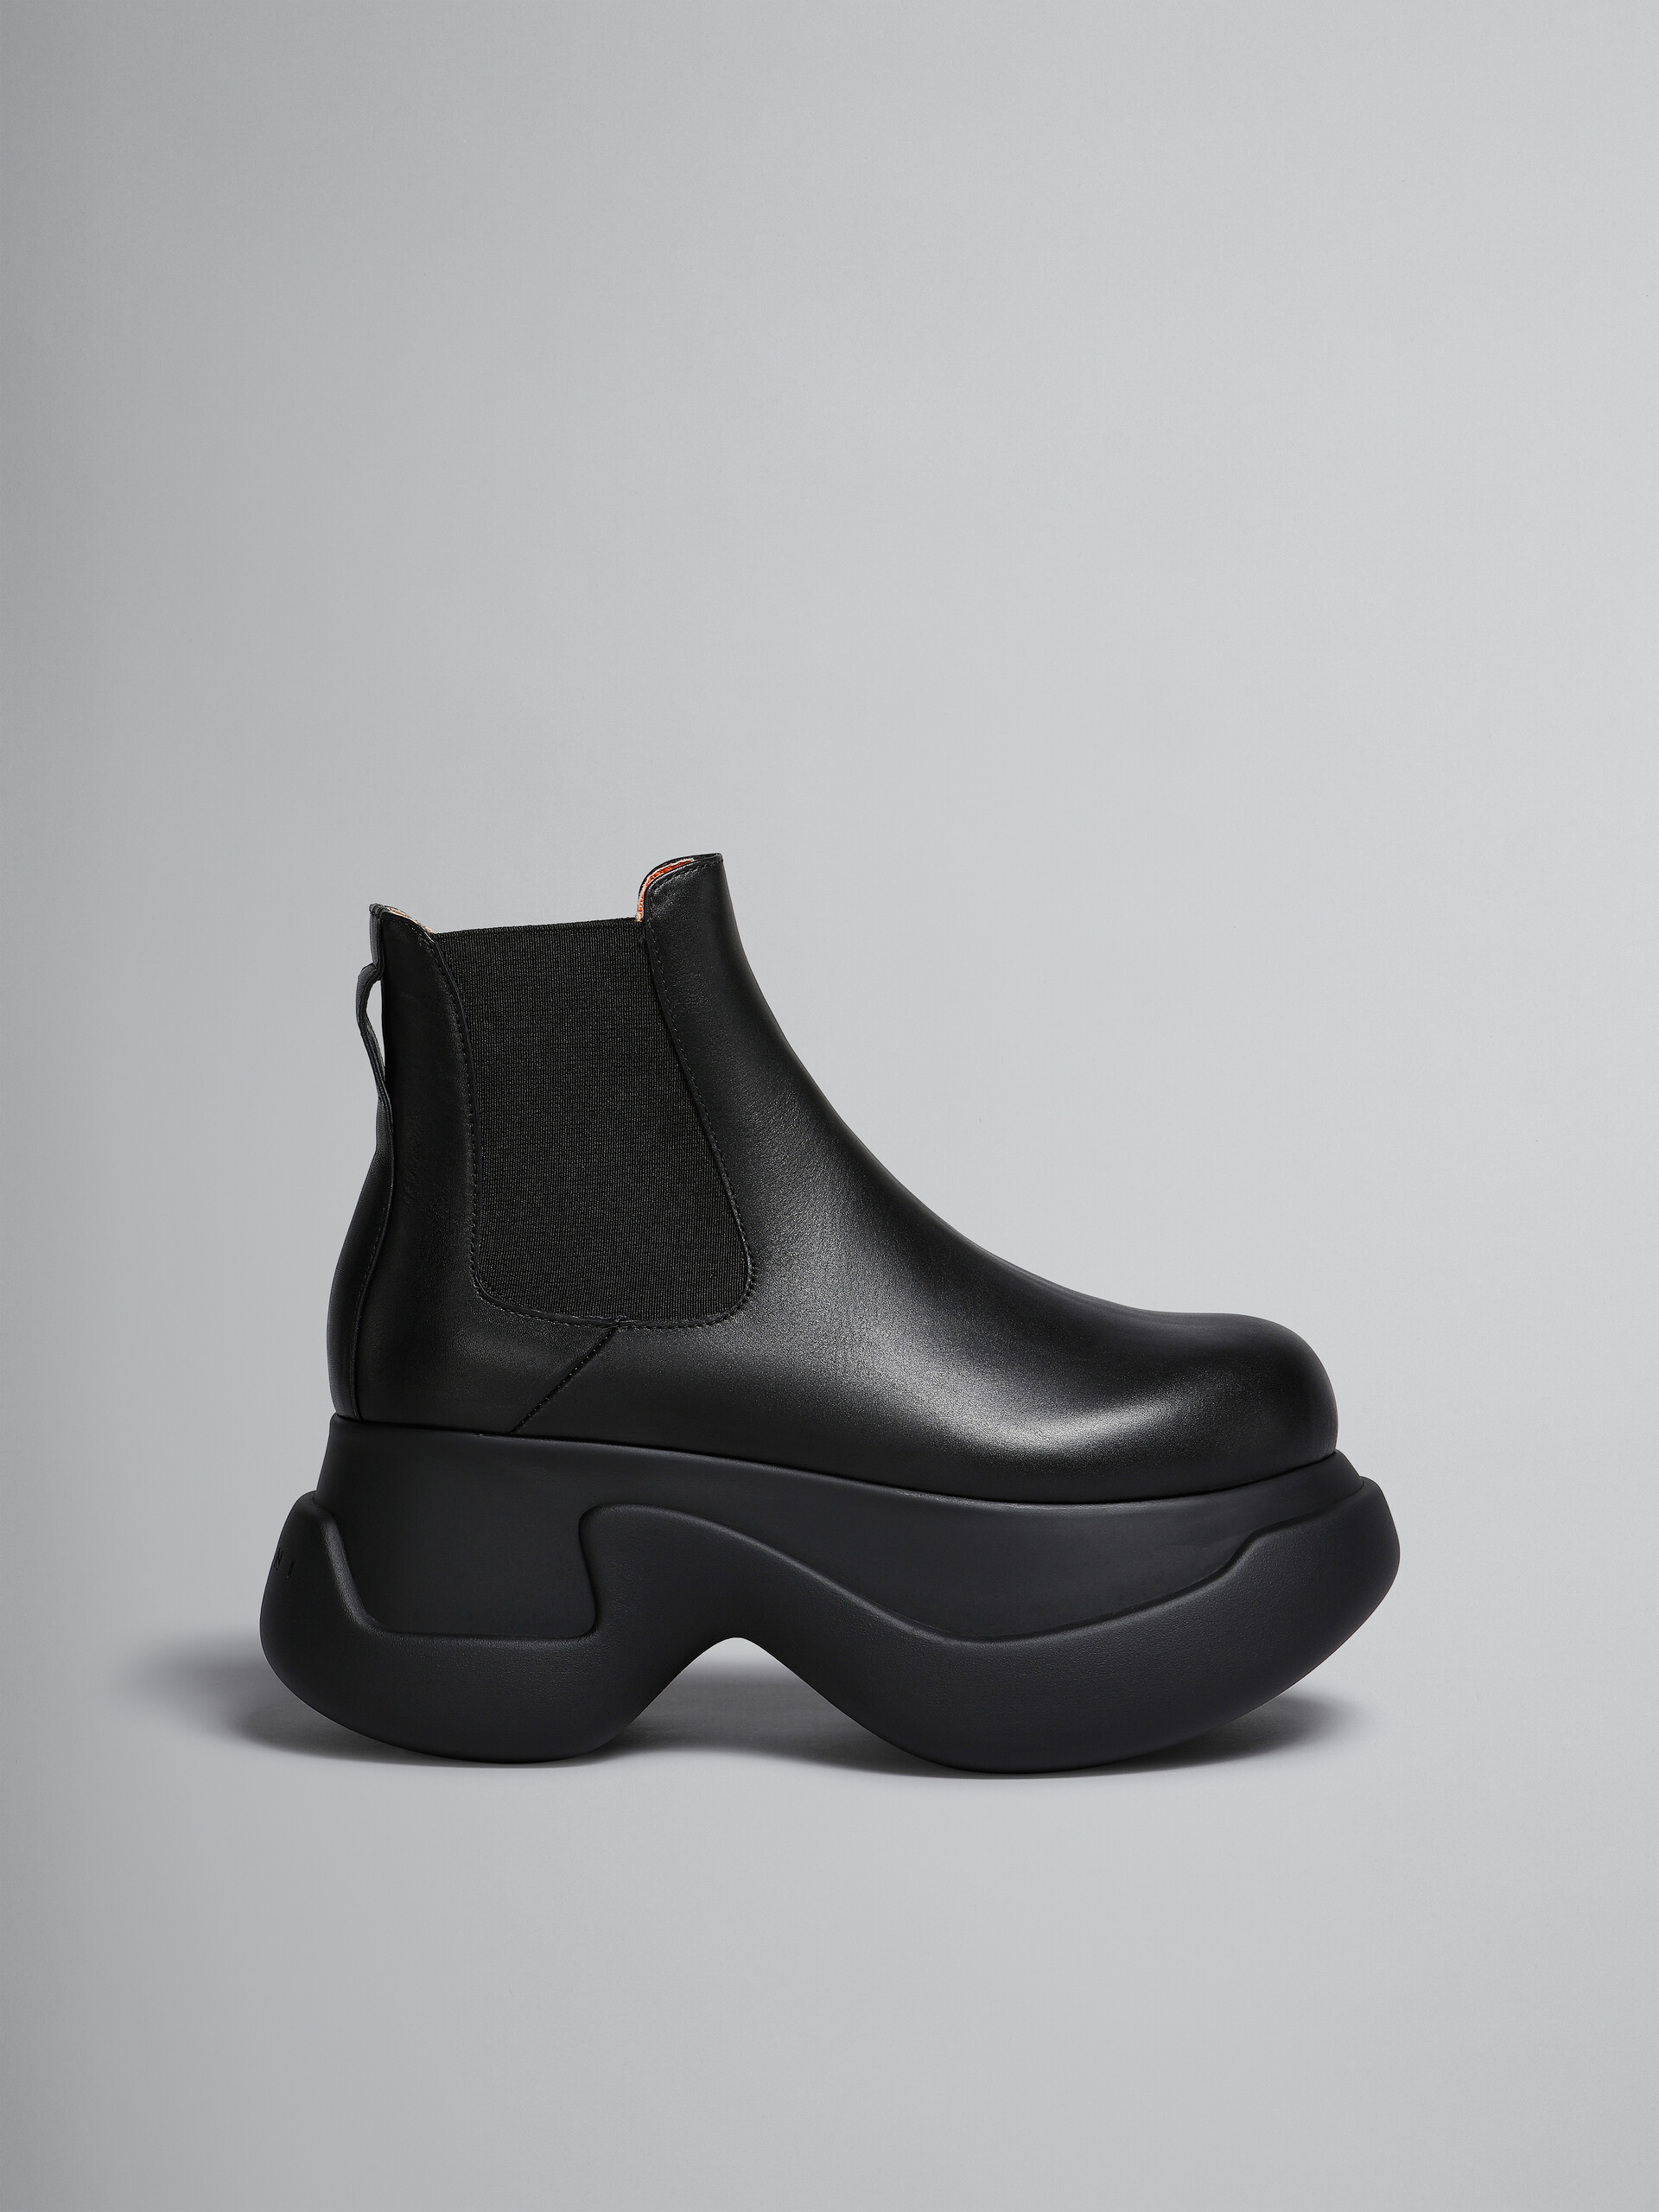 Black leather Aras 23 chelsea boot - Boots - Image 1